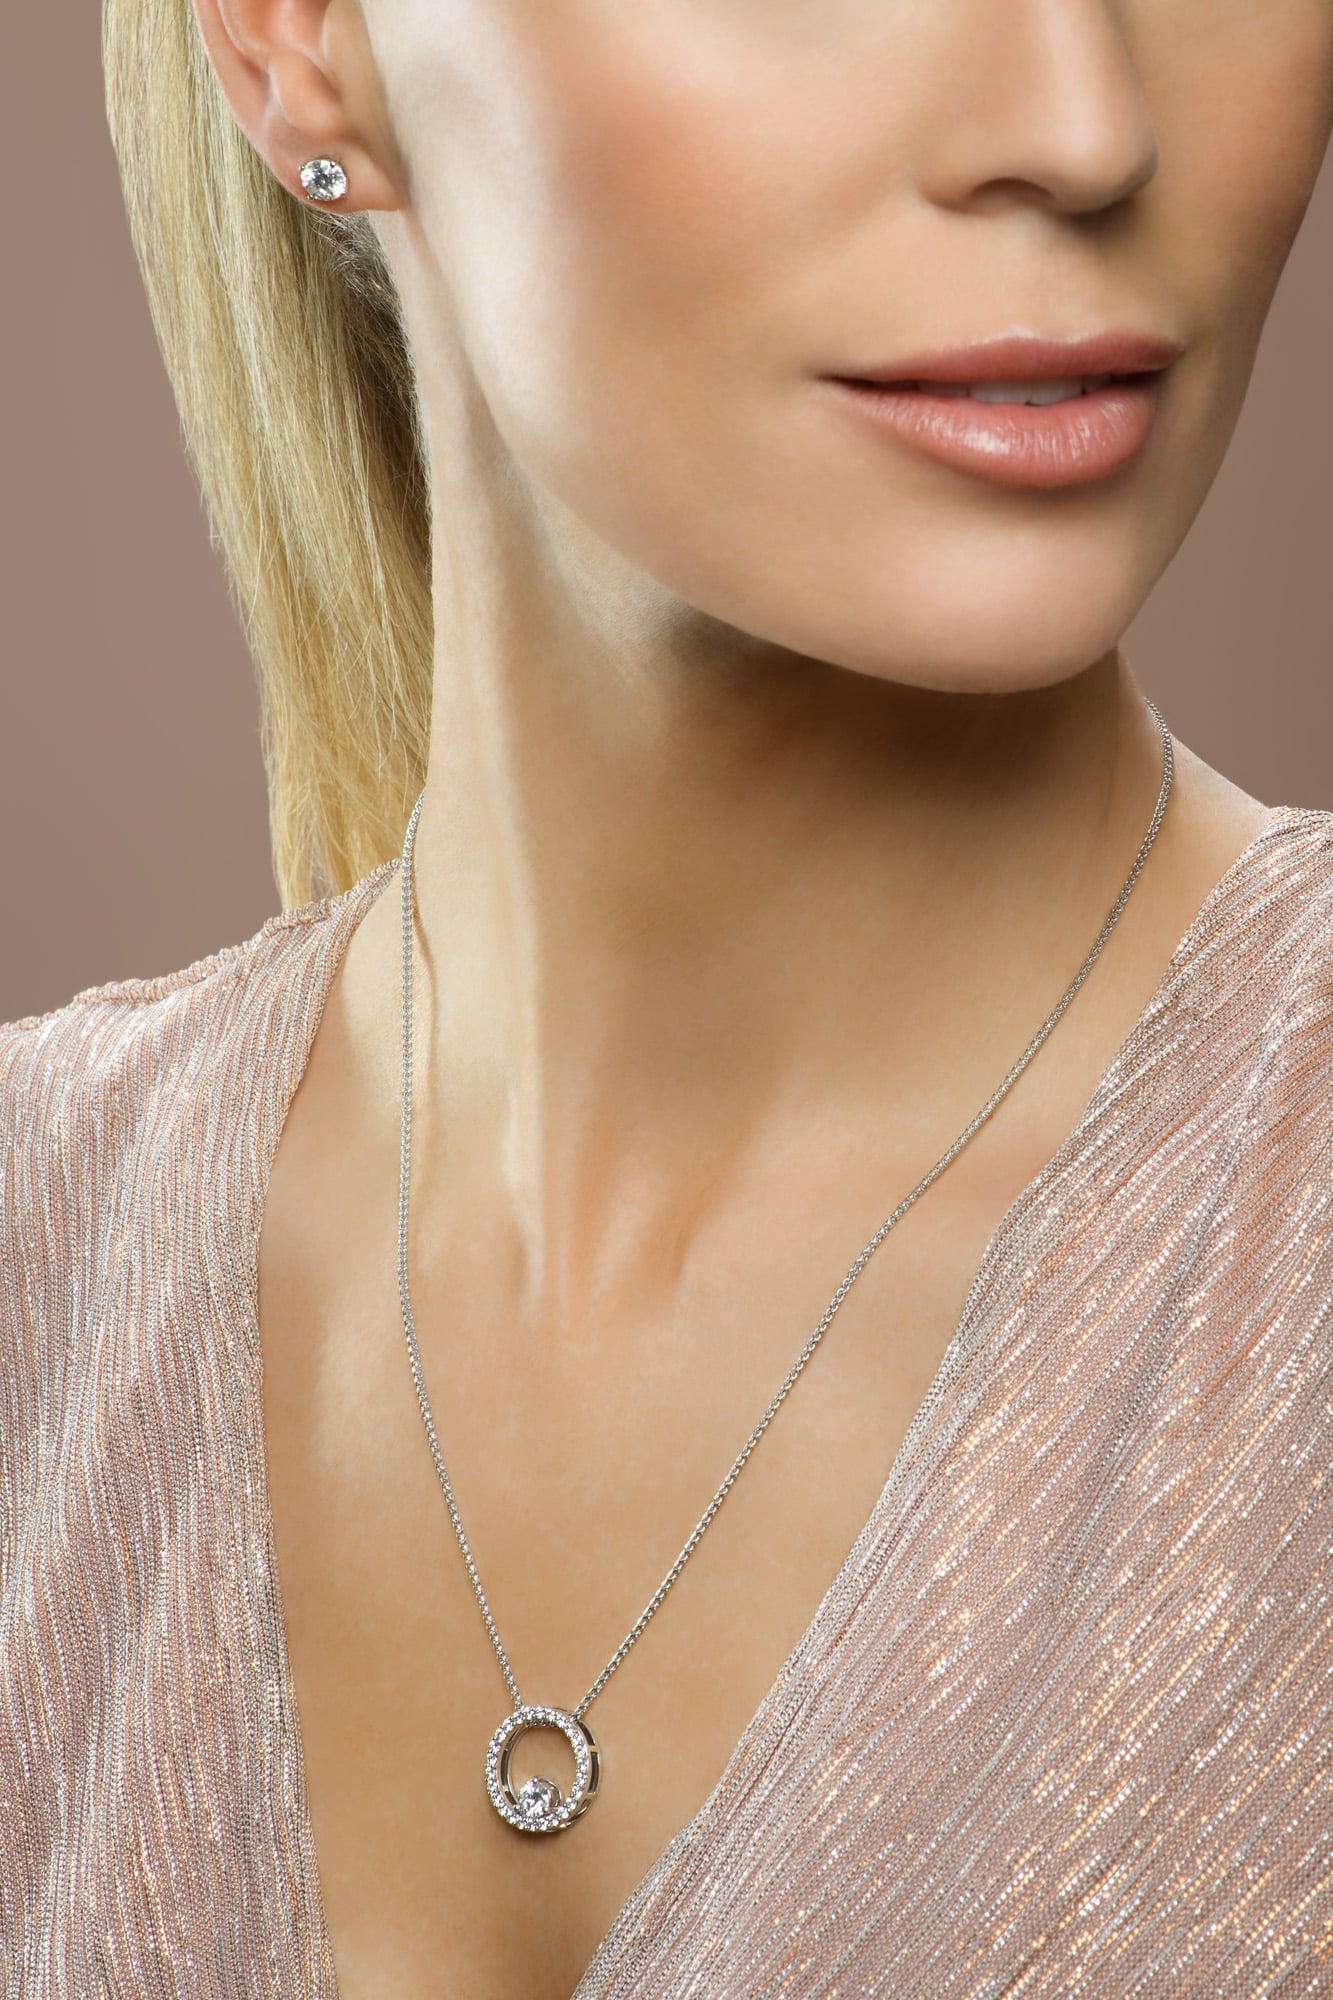 Model wearing diamond stud earring and round necklace and pedant